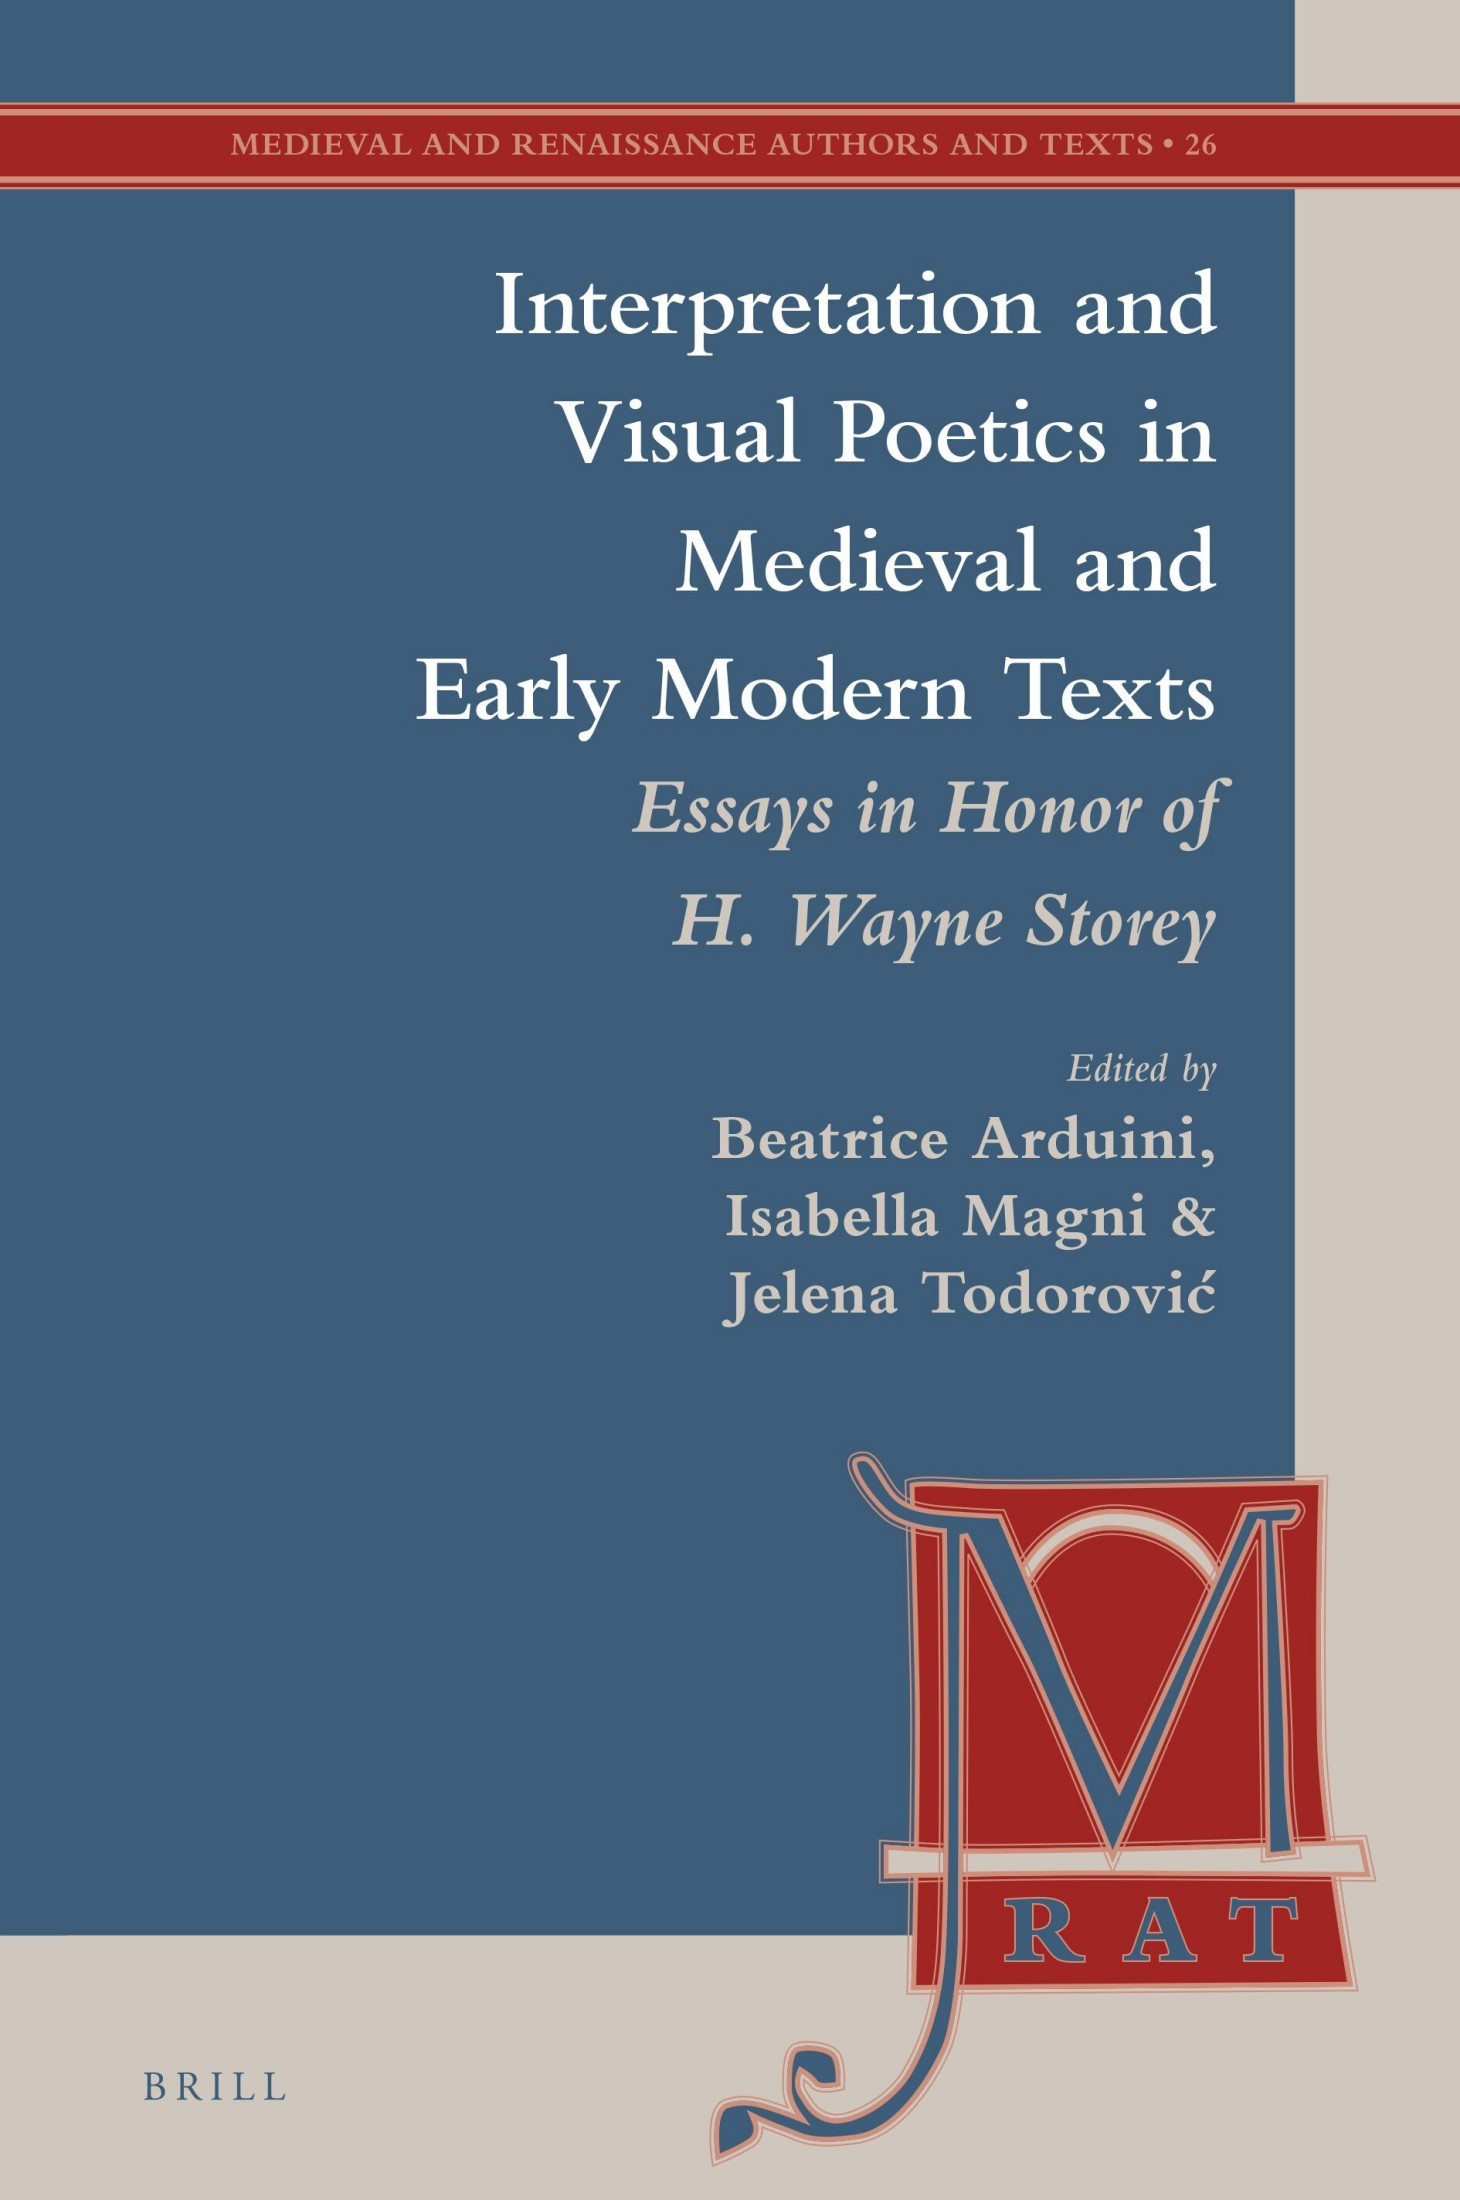 Interpretation and Visual Poetics in Medieval and Early Modern Texts: Essays in Honor of H. Wayne Storey